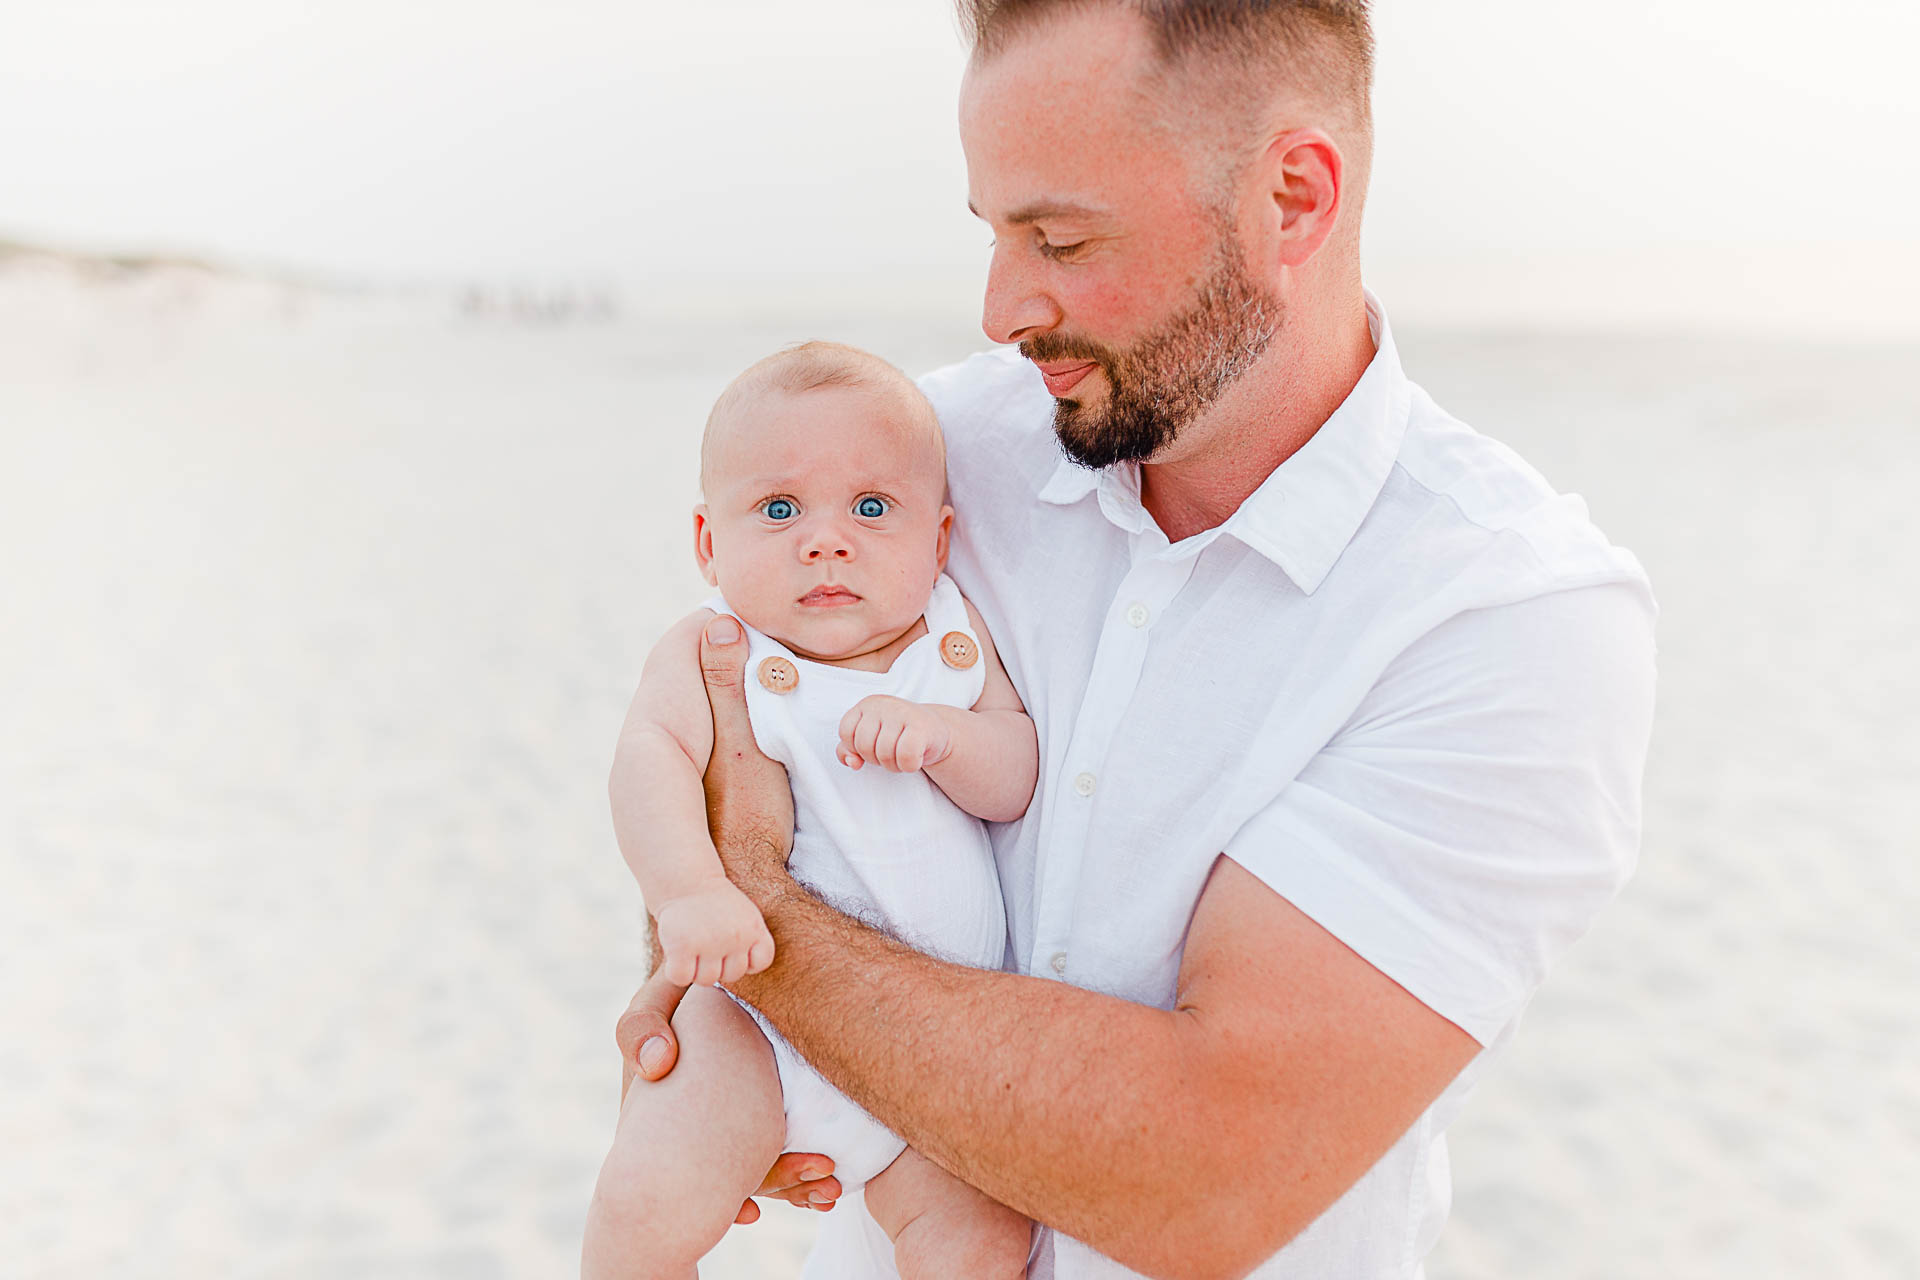 Photo by Cape Cod Family Photographer Christina Runnals | Dad holding baby boy on beach